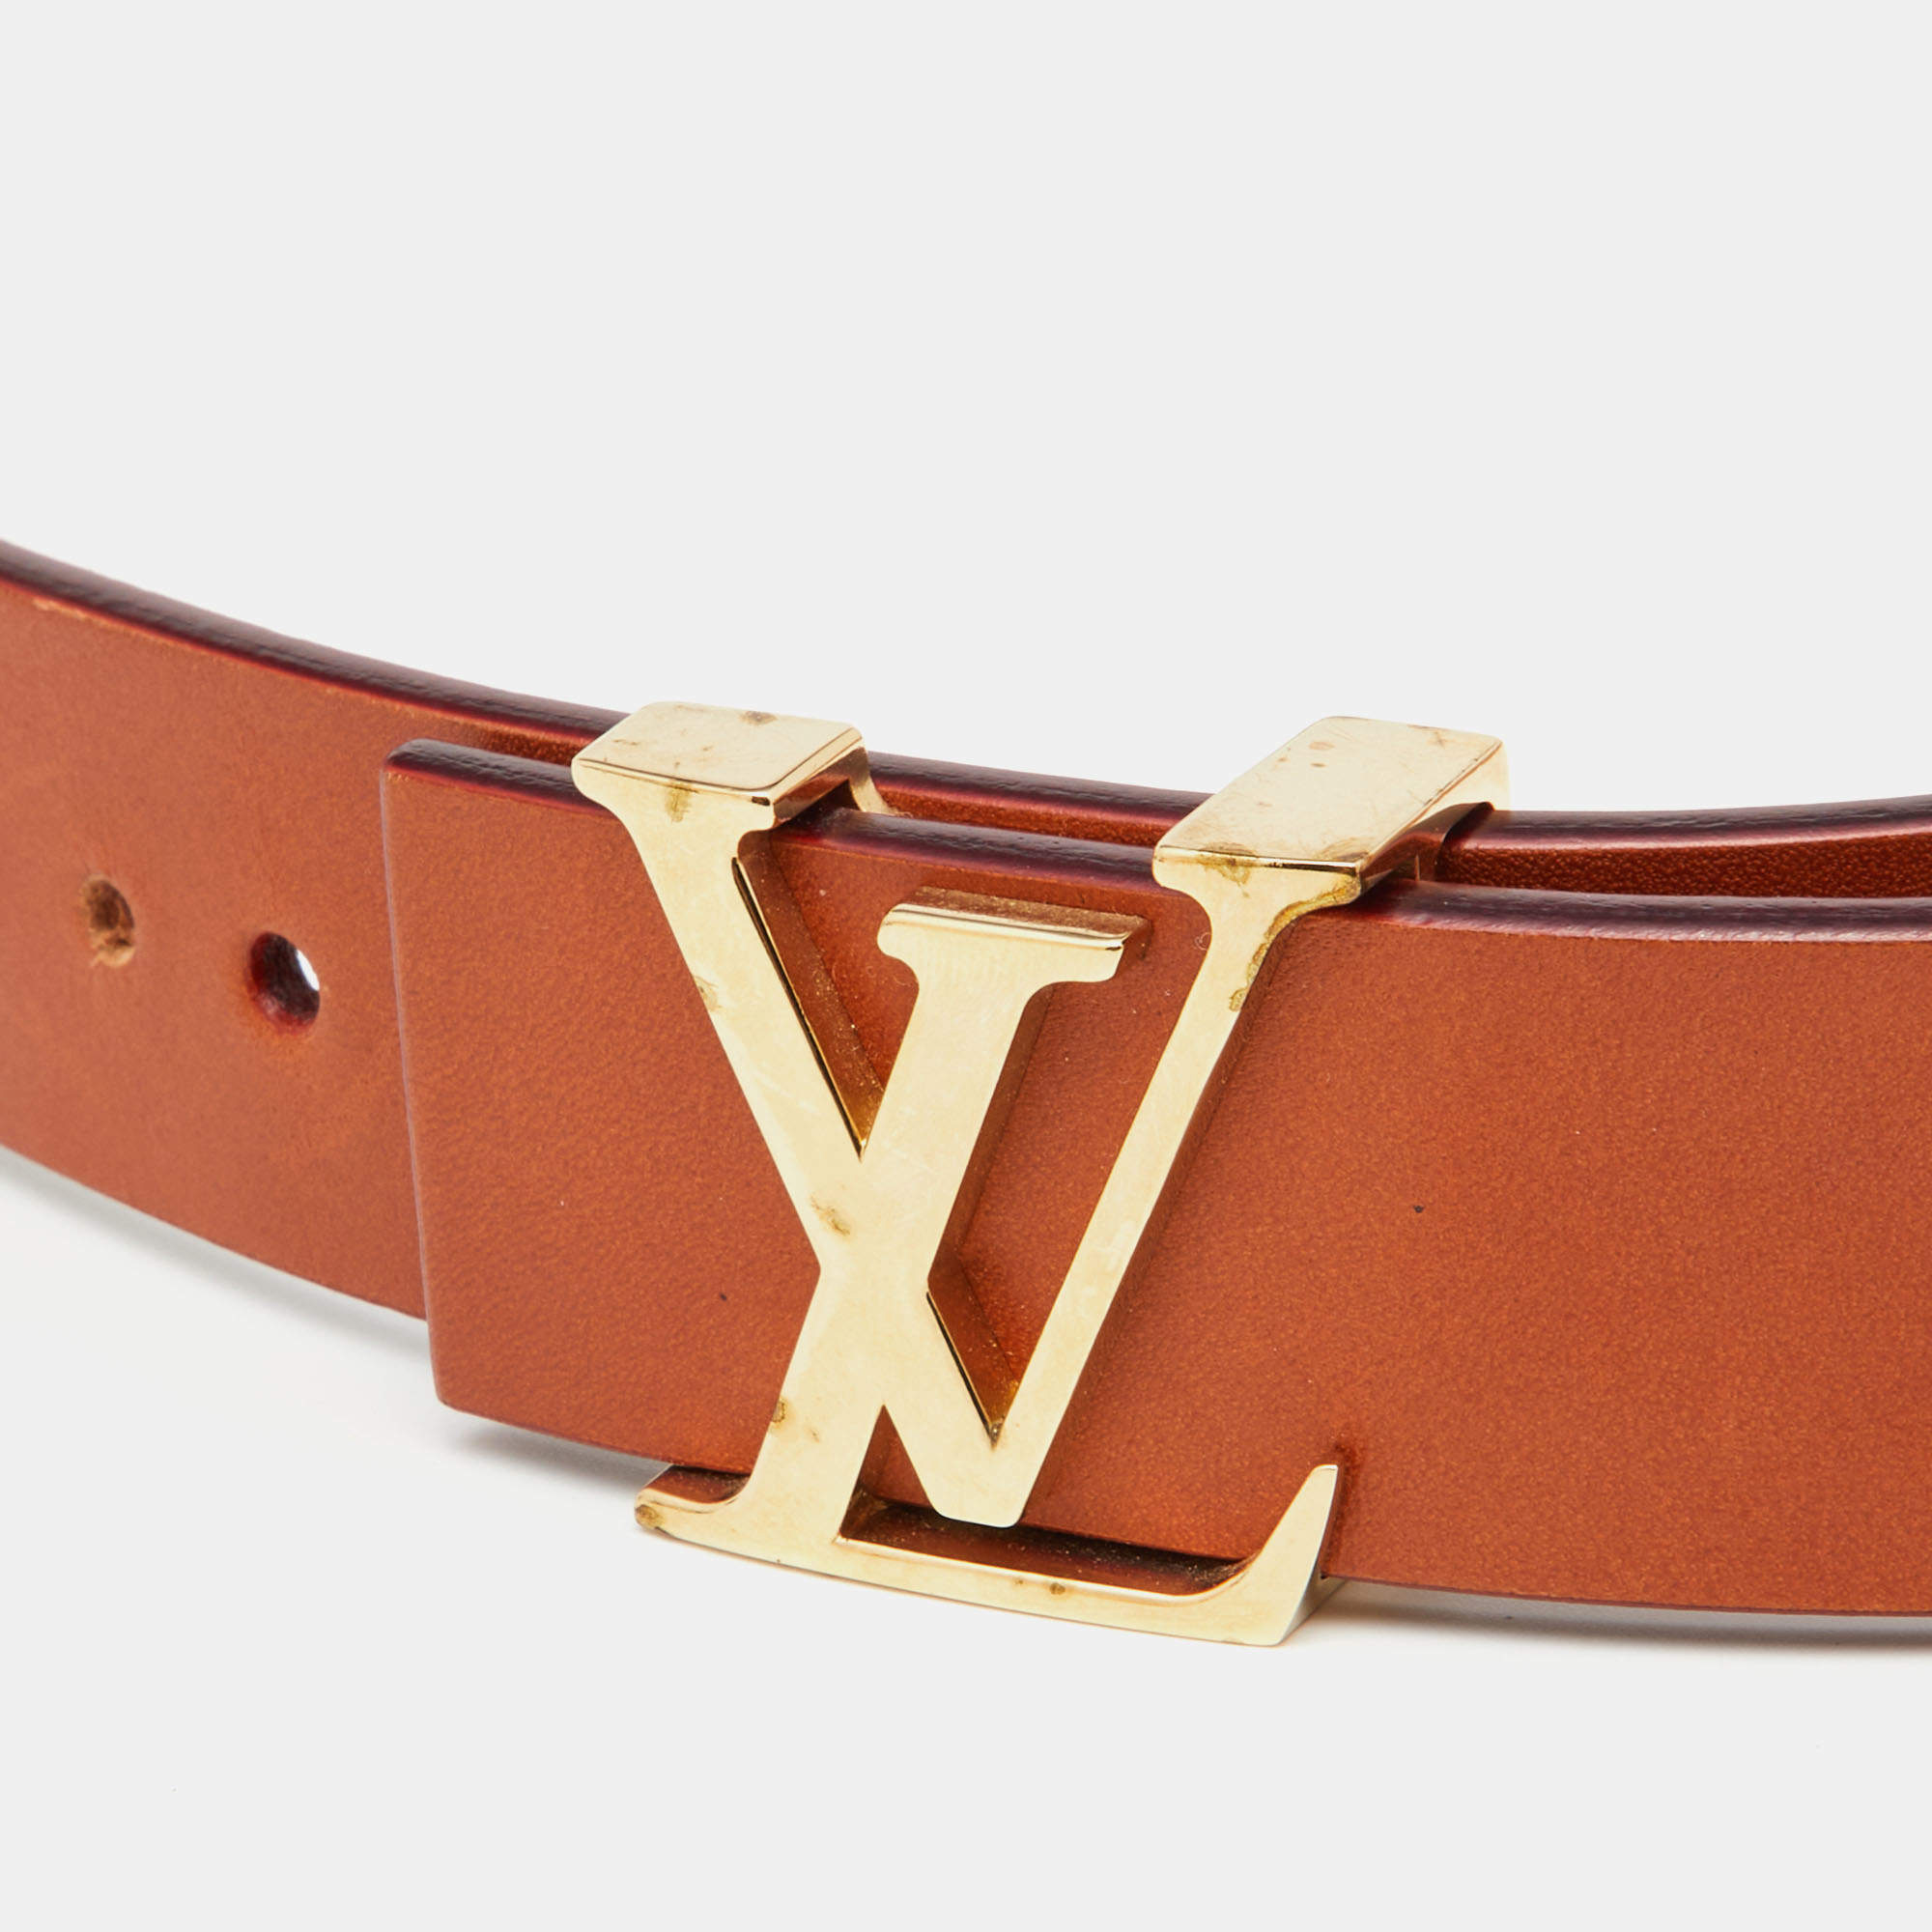 Initiales leather belt Louis Vuitton Brown size 85 cm in Leather - 33853896